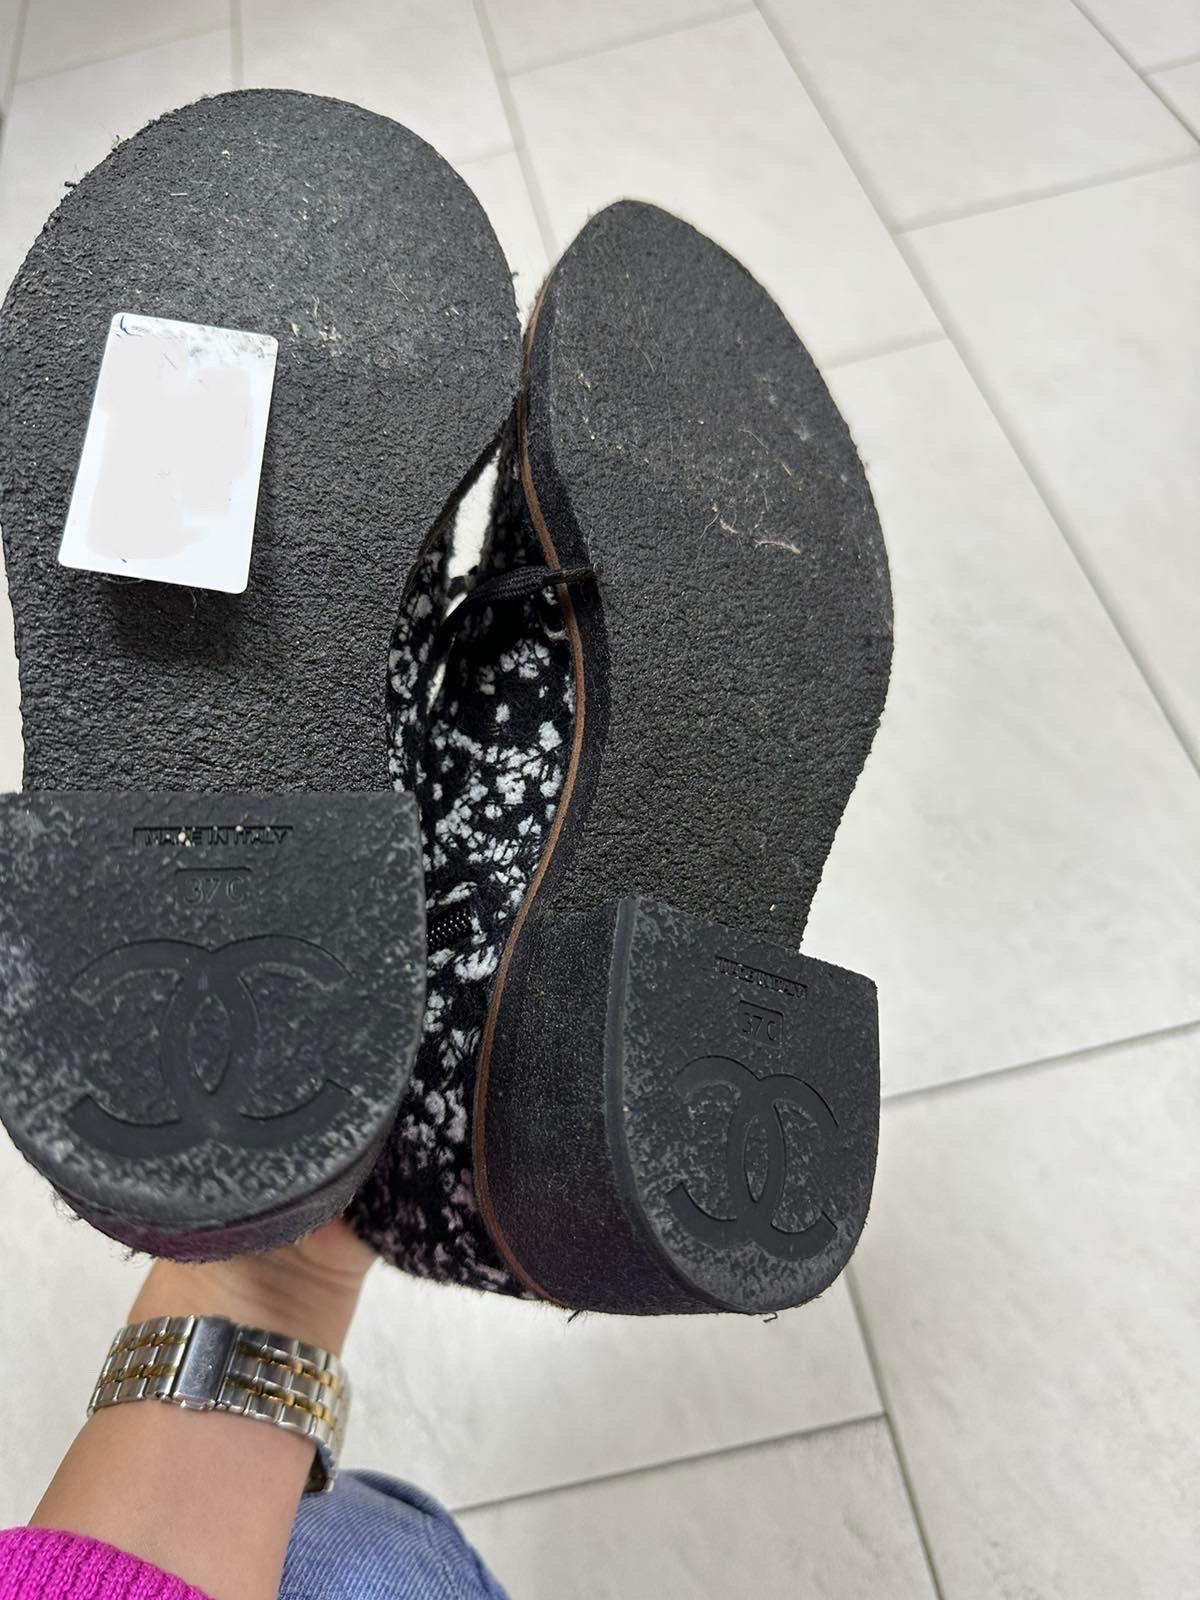 Chanel Tweed Lace Uo Ankle Boots In Good Condition For Sale In Krakow, PL